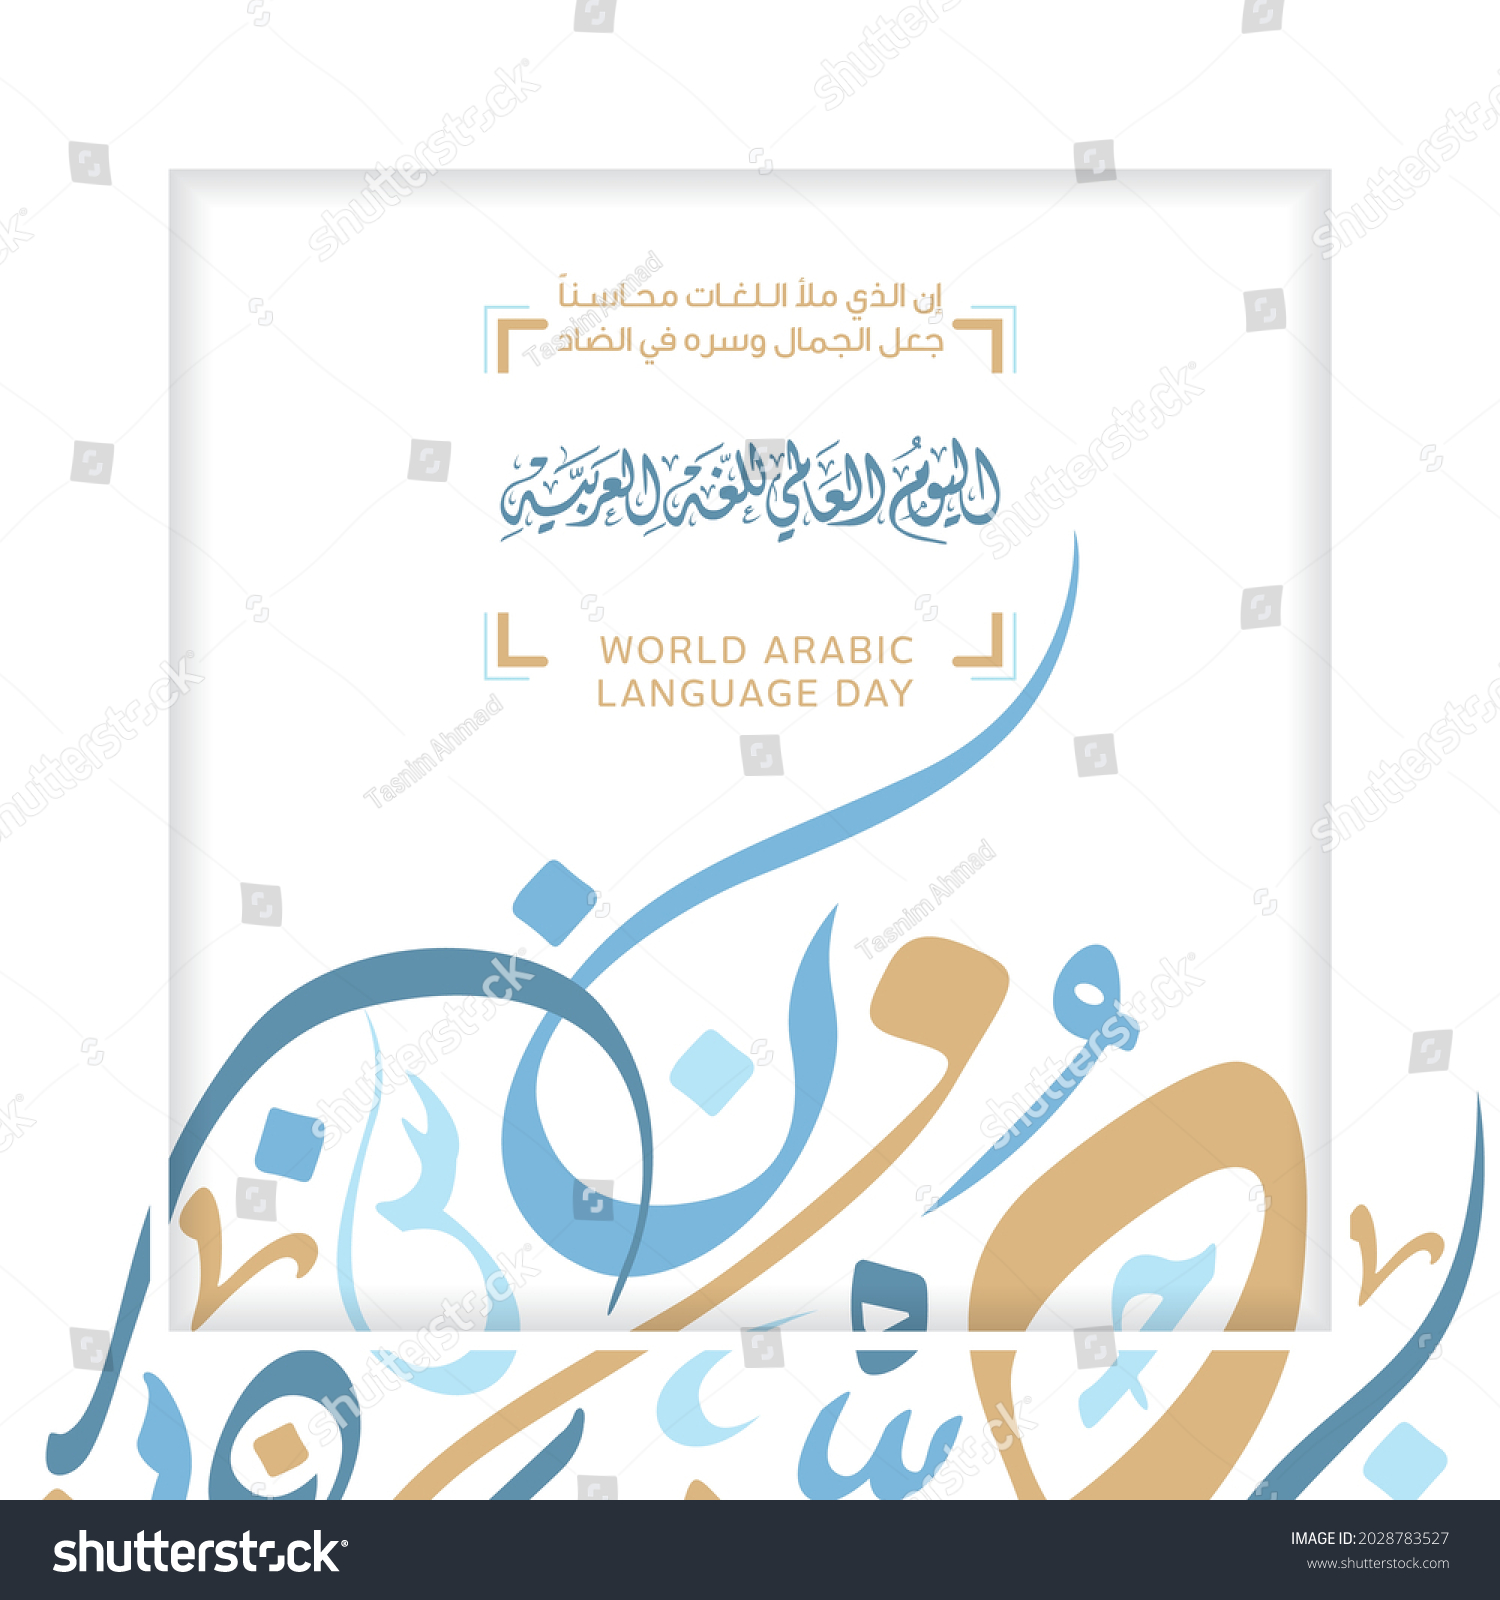 World Arabic Language Day Th December Stock Vector Royalty Free Shutterstock